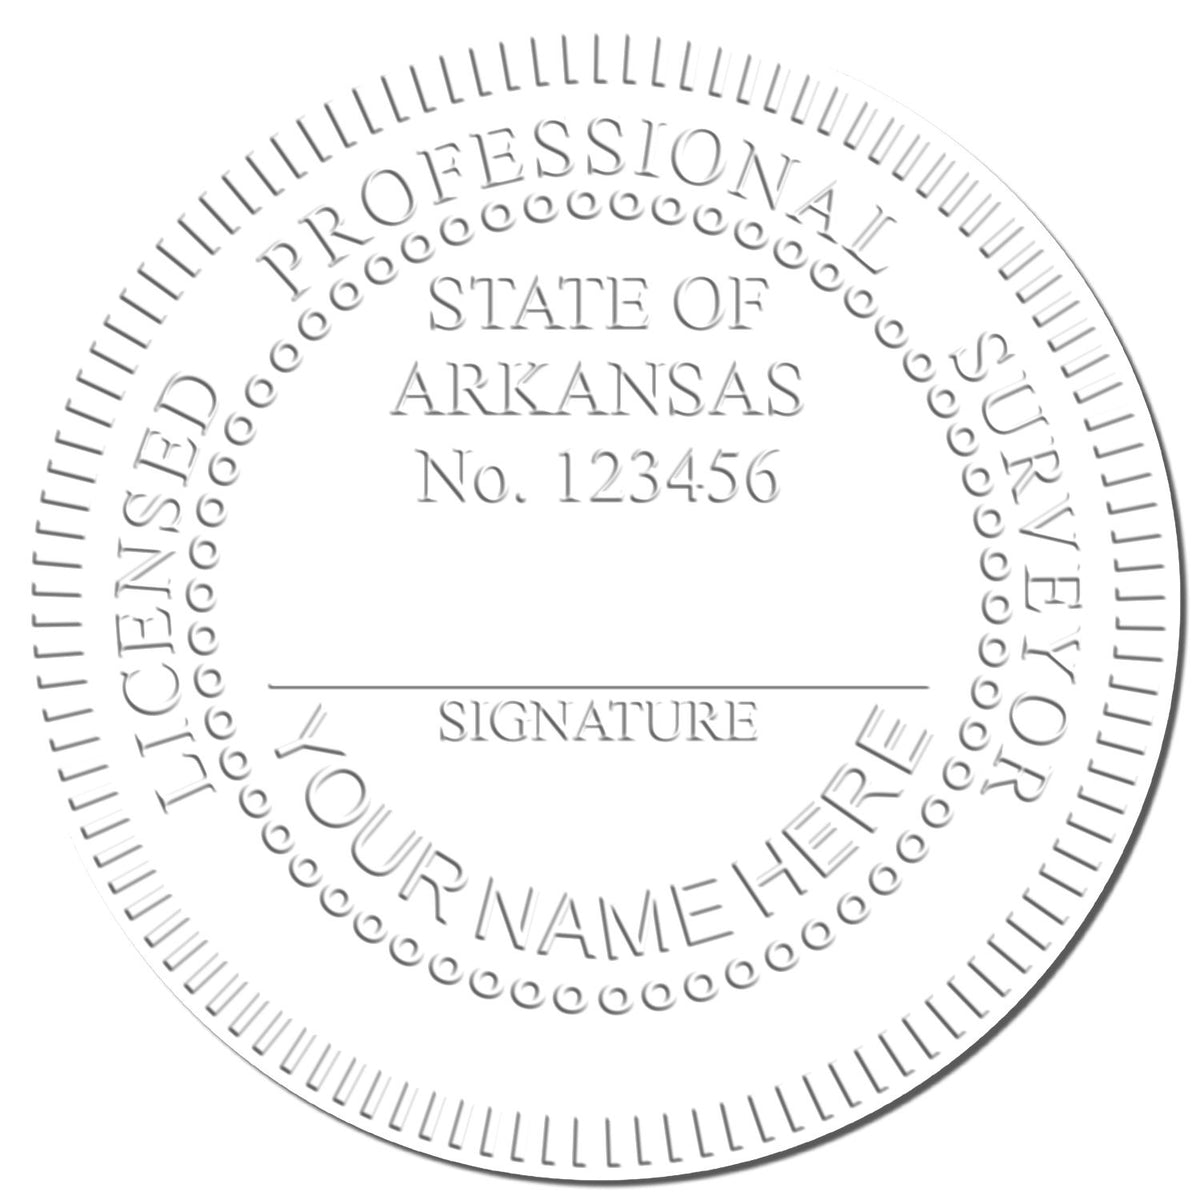 This paper is stamped with a sample imprint of the Gift Arkansas Land Surveyor Seal, signifying its quality and reliability.